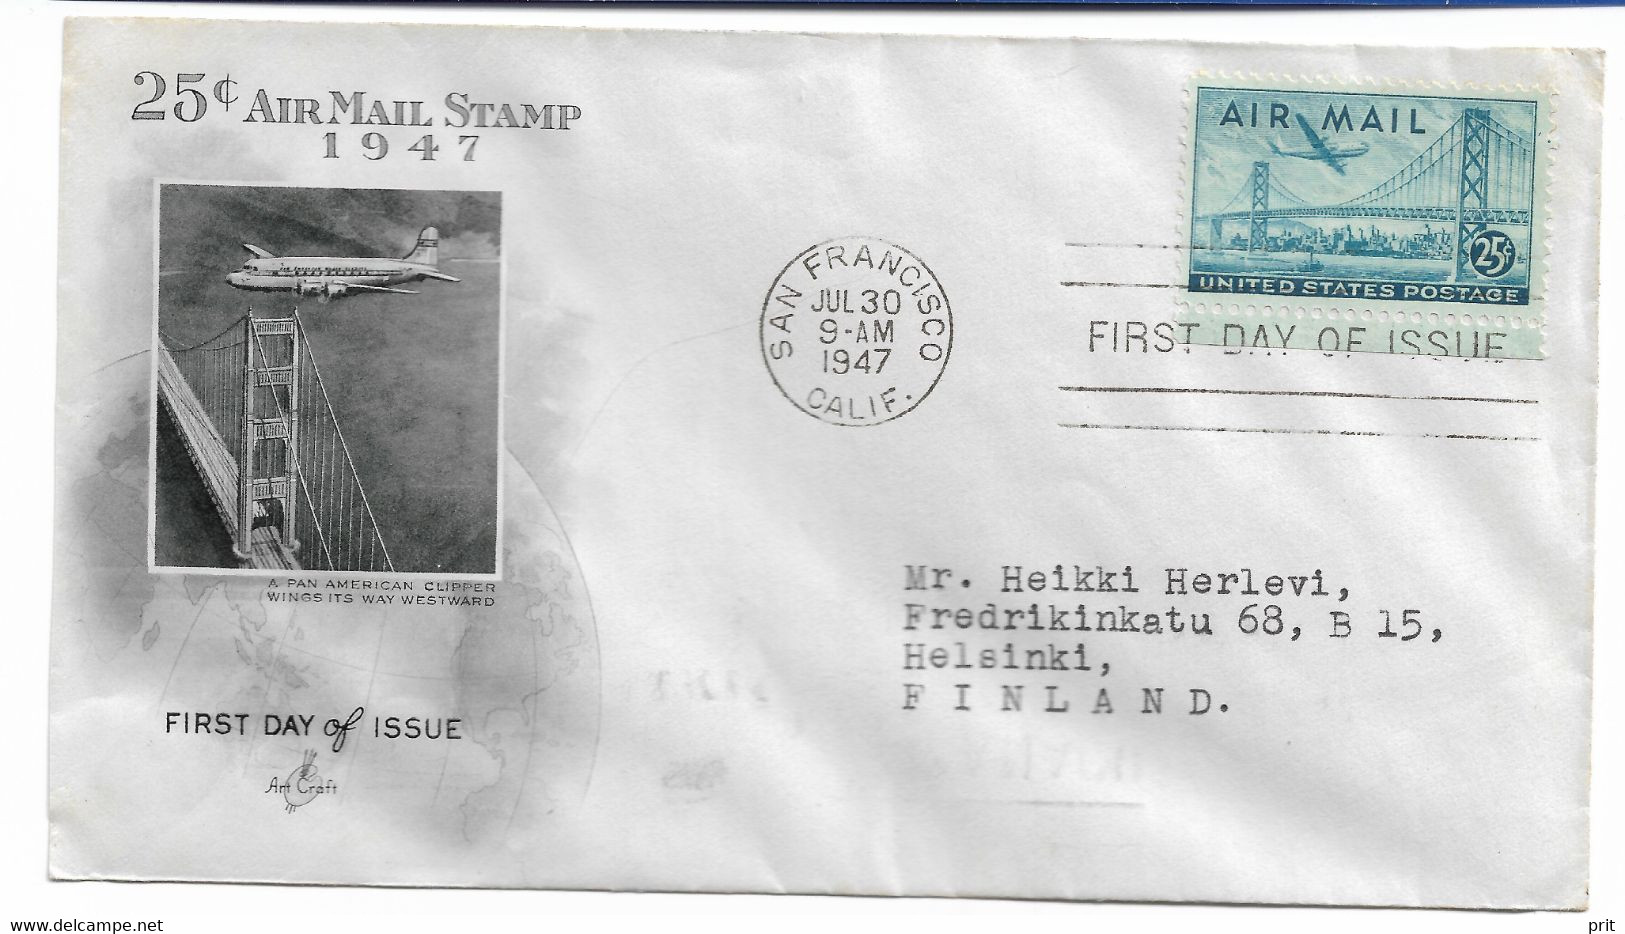 United States 1947 25c Airmail Stamp, Beautiful First Day Cover From San Francisco To Helsinki. Scott C36. - 1941-1950